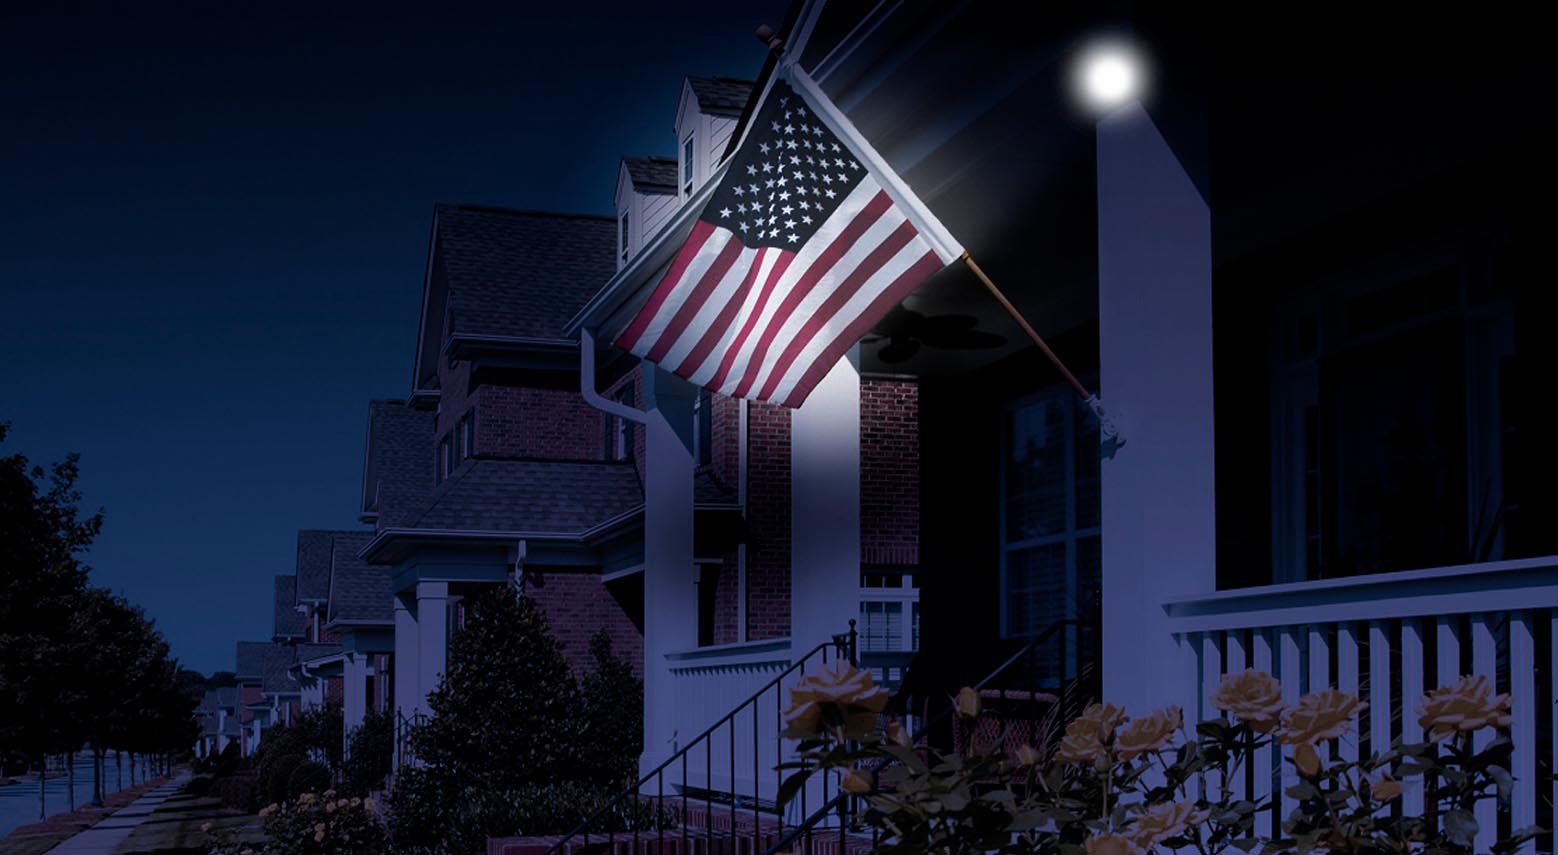 How Solar Products Help You Adhere to the U.S. Flag Code